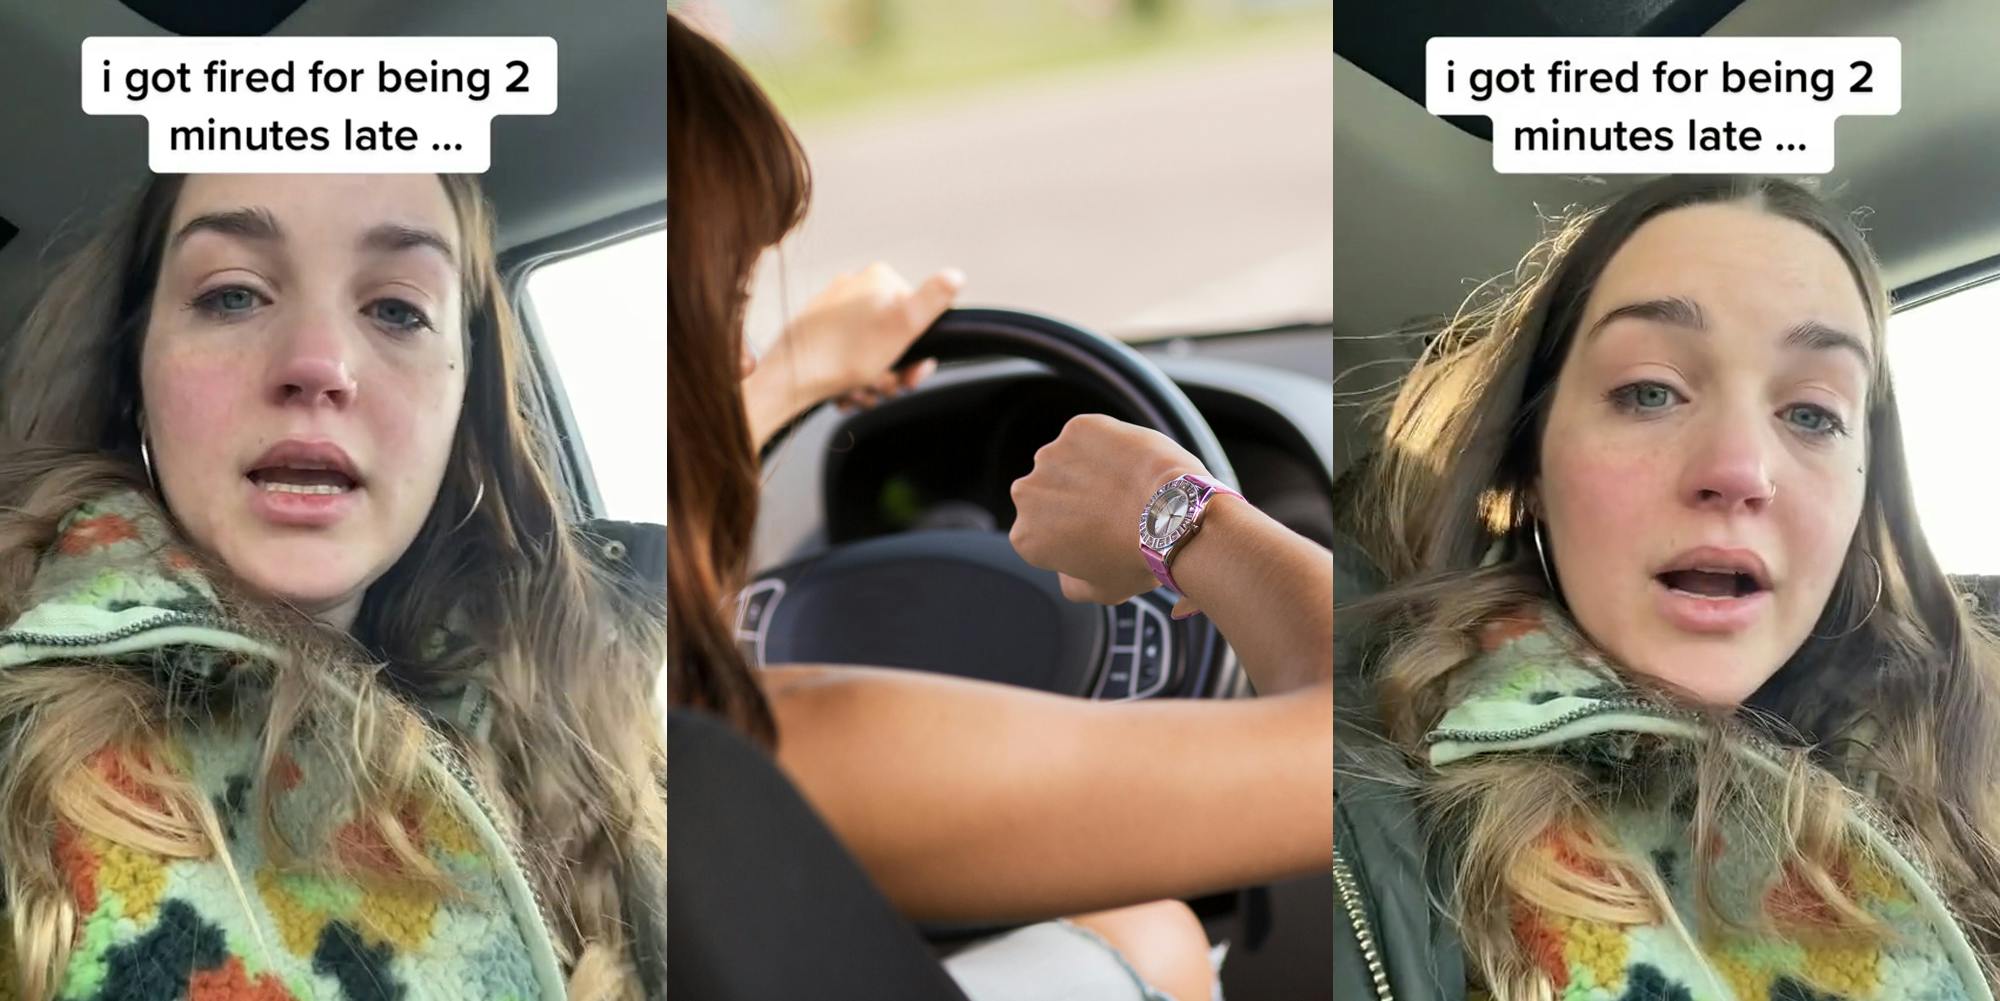 woman speaking in car with caption "i got fired for being 2 minutes late..." (l) woman driving while checking time on watch (c) woman speaking in car with caption "i got fired for being 2 minutes late..." (r)